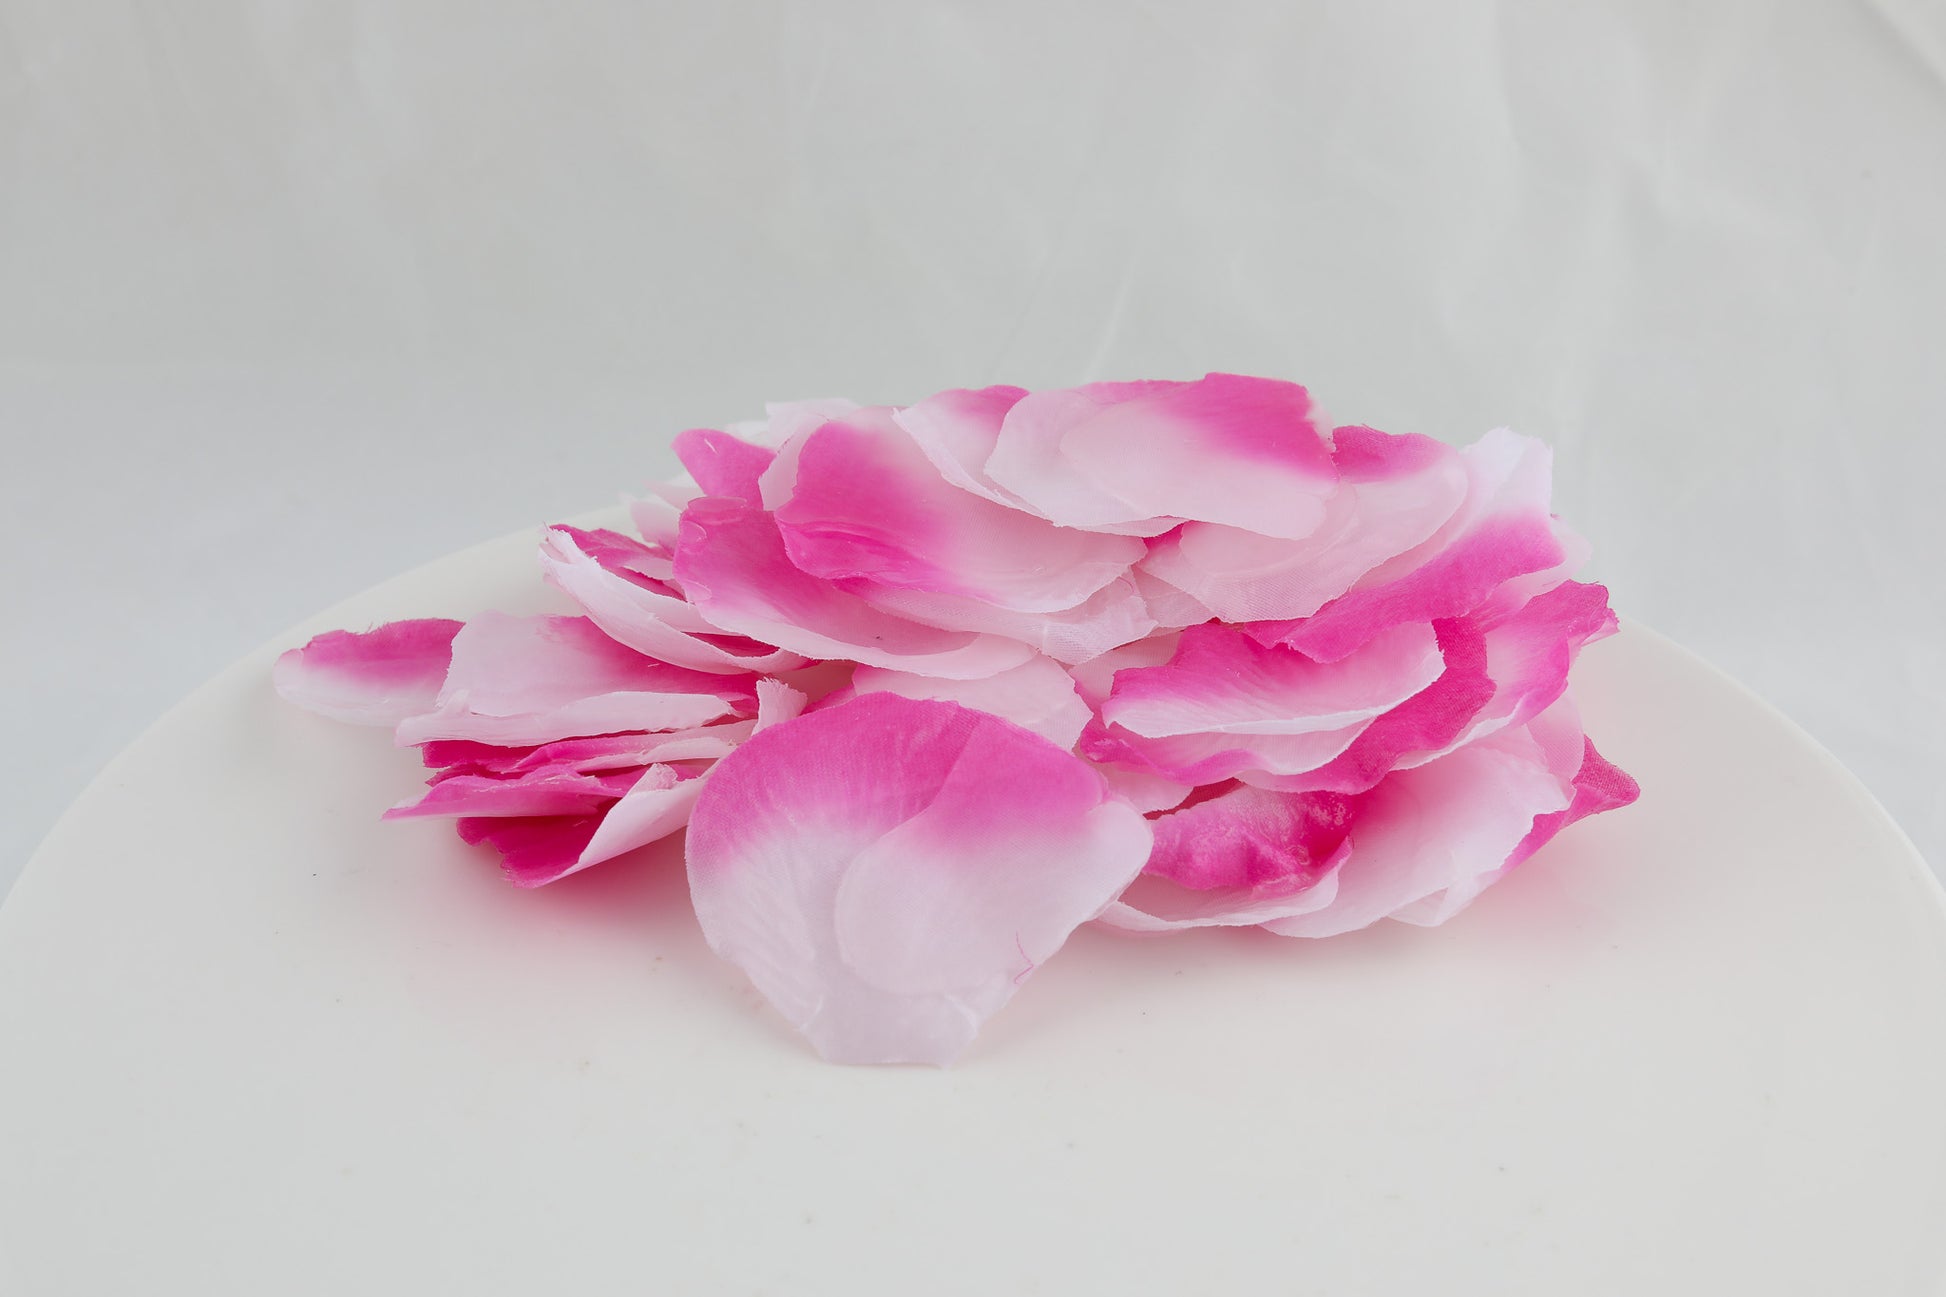 soap shaped as flower petals in white with pink edges